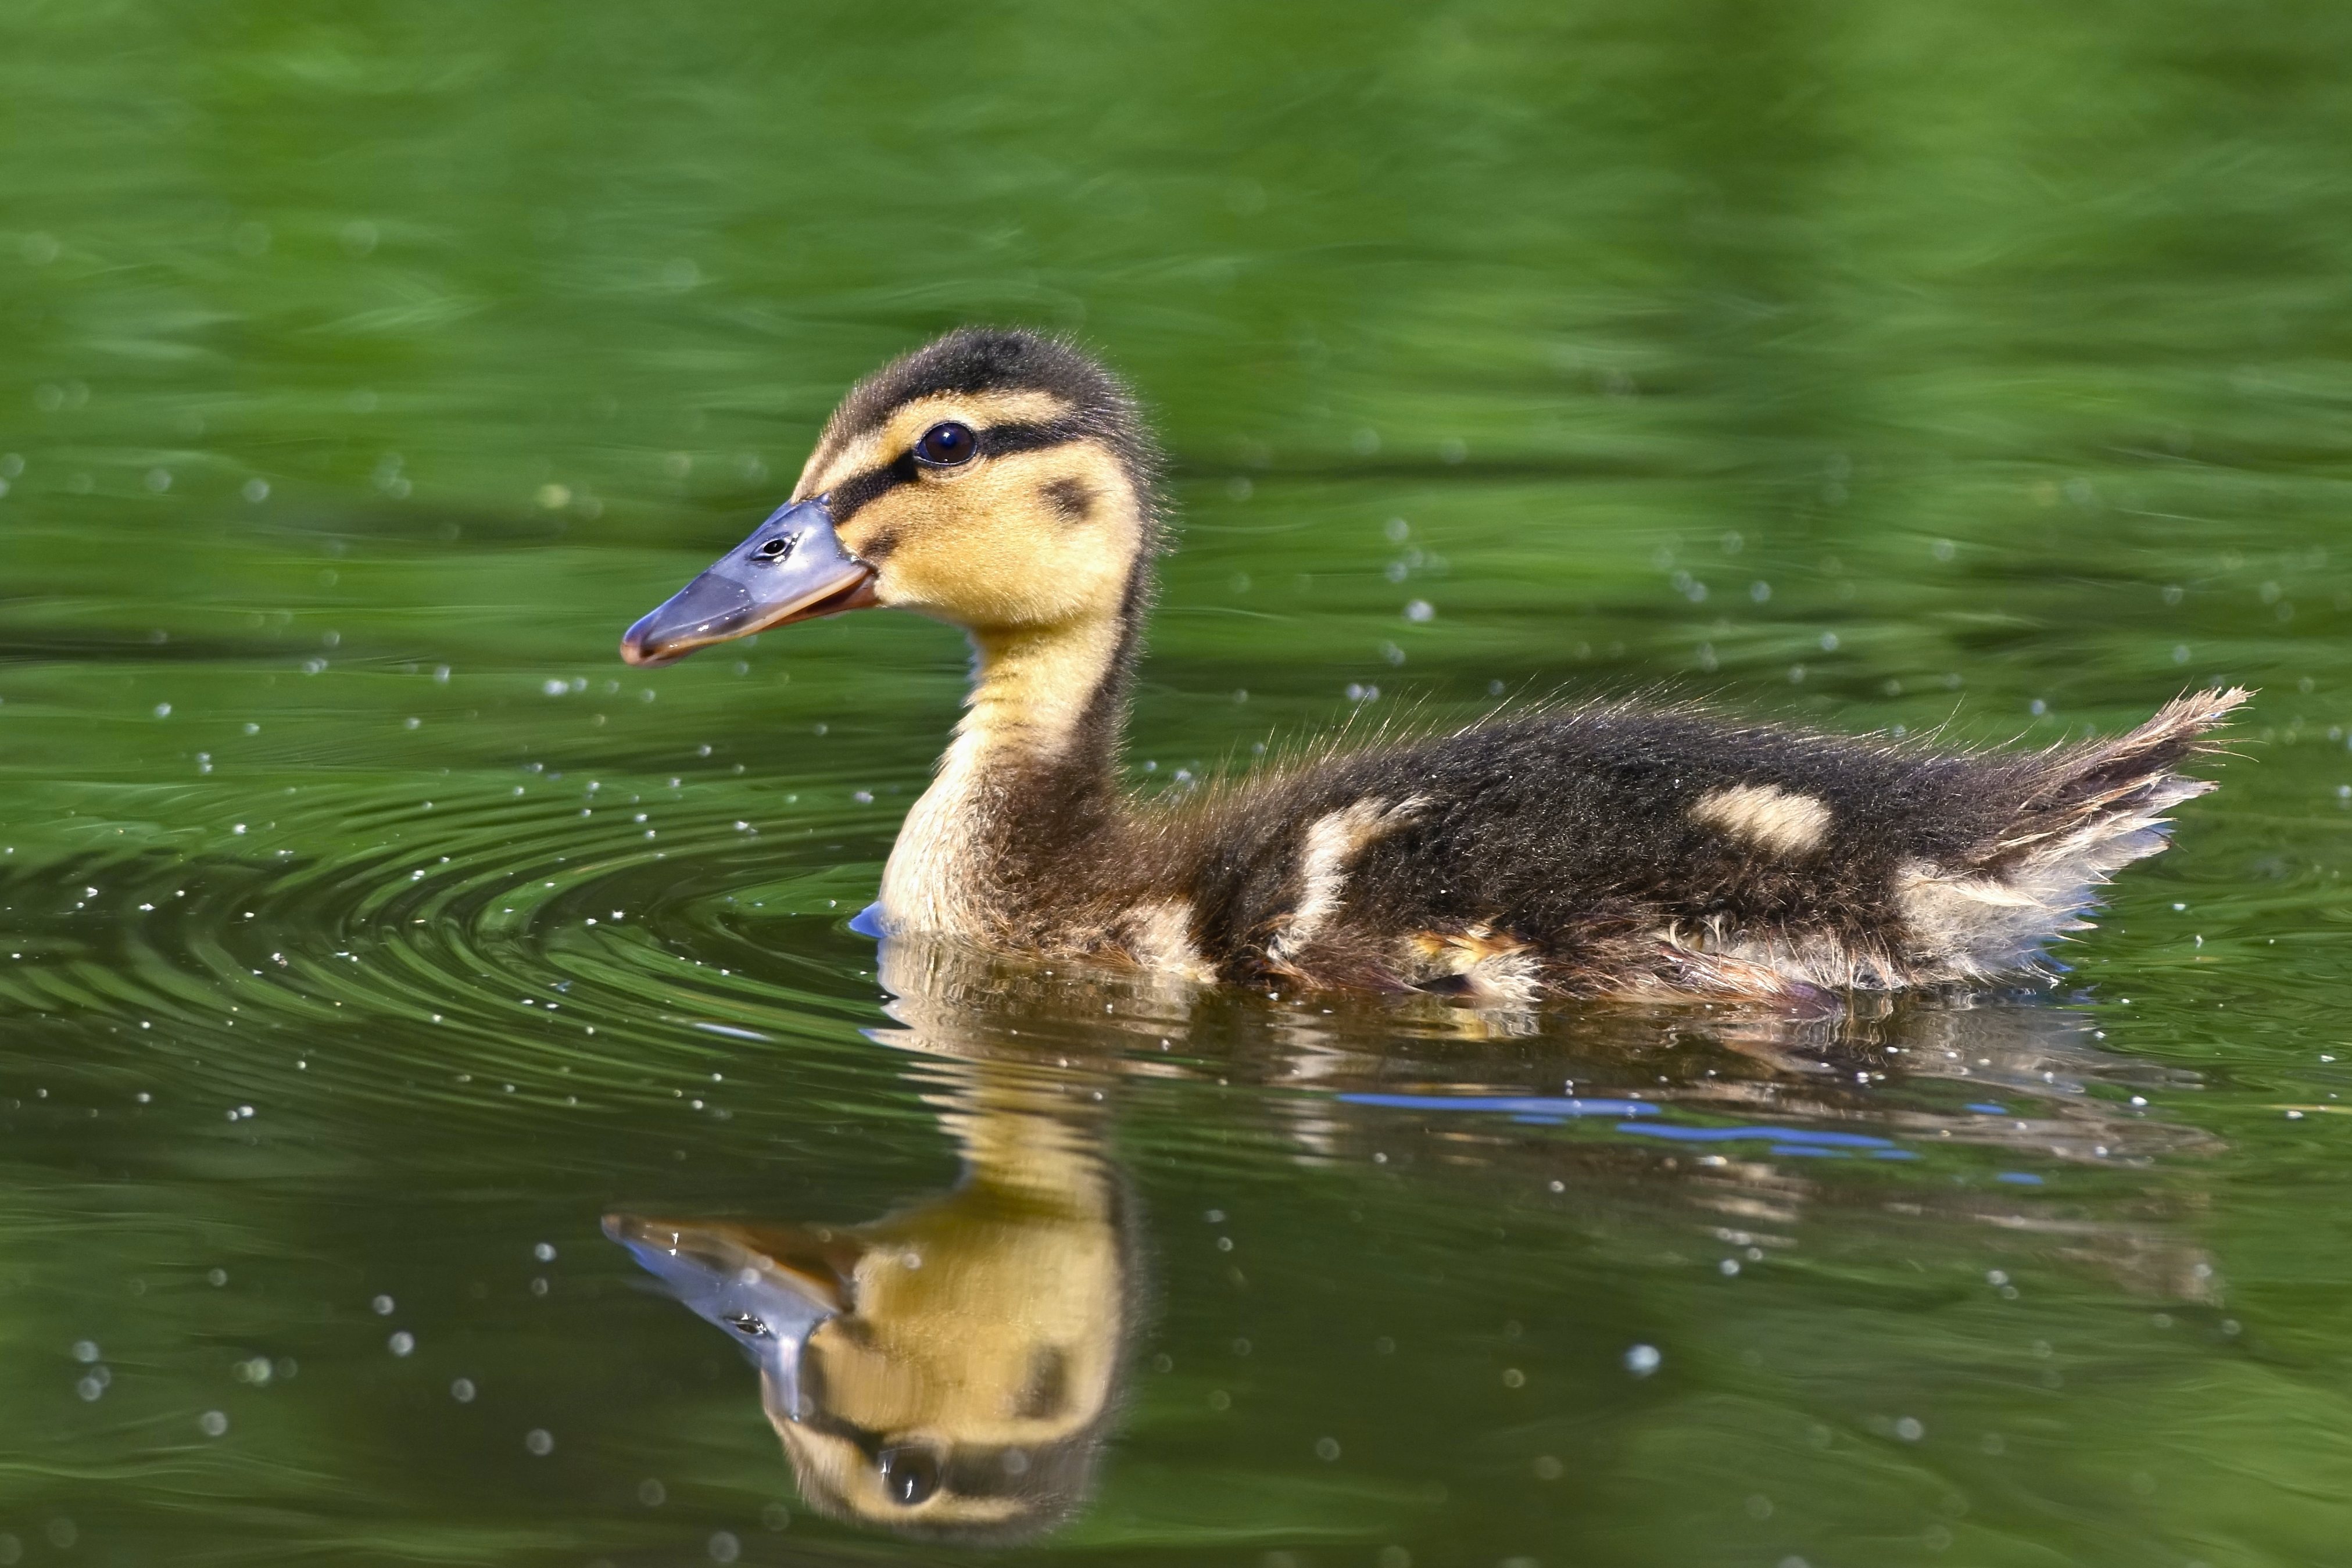 Lameness or lice can be two diseases of ducks